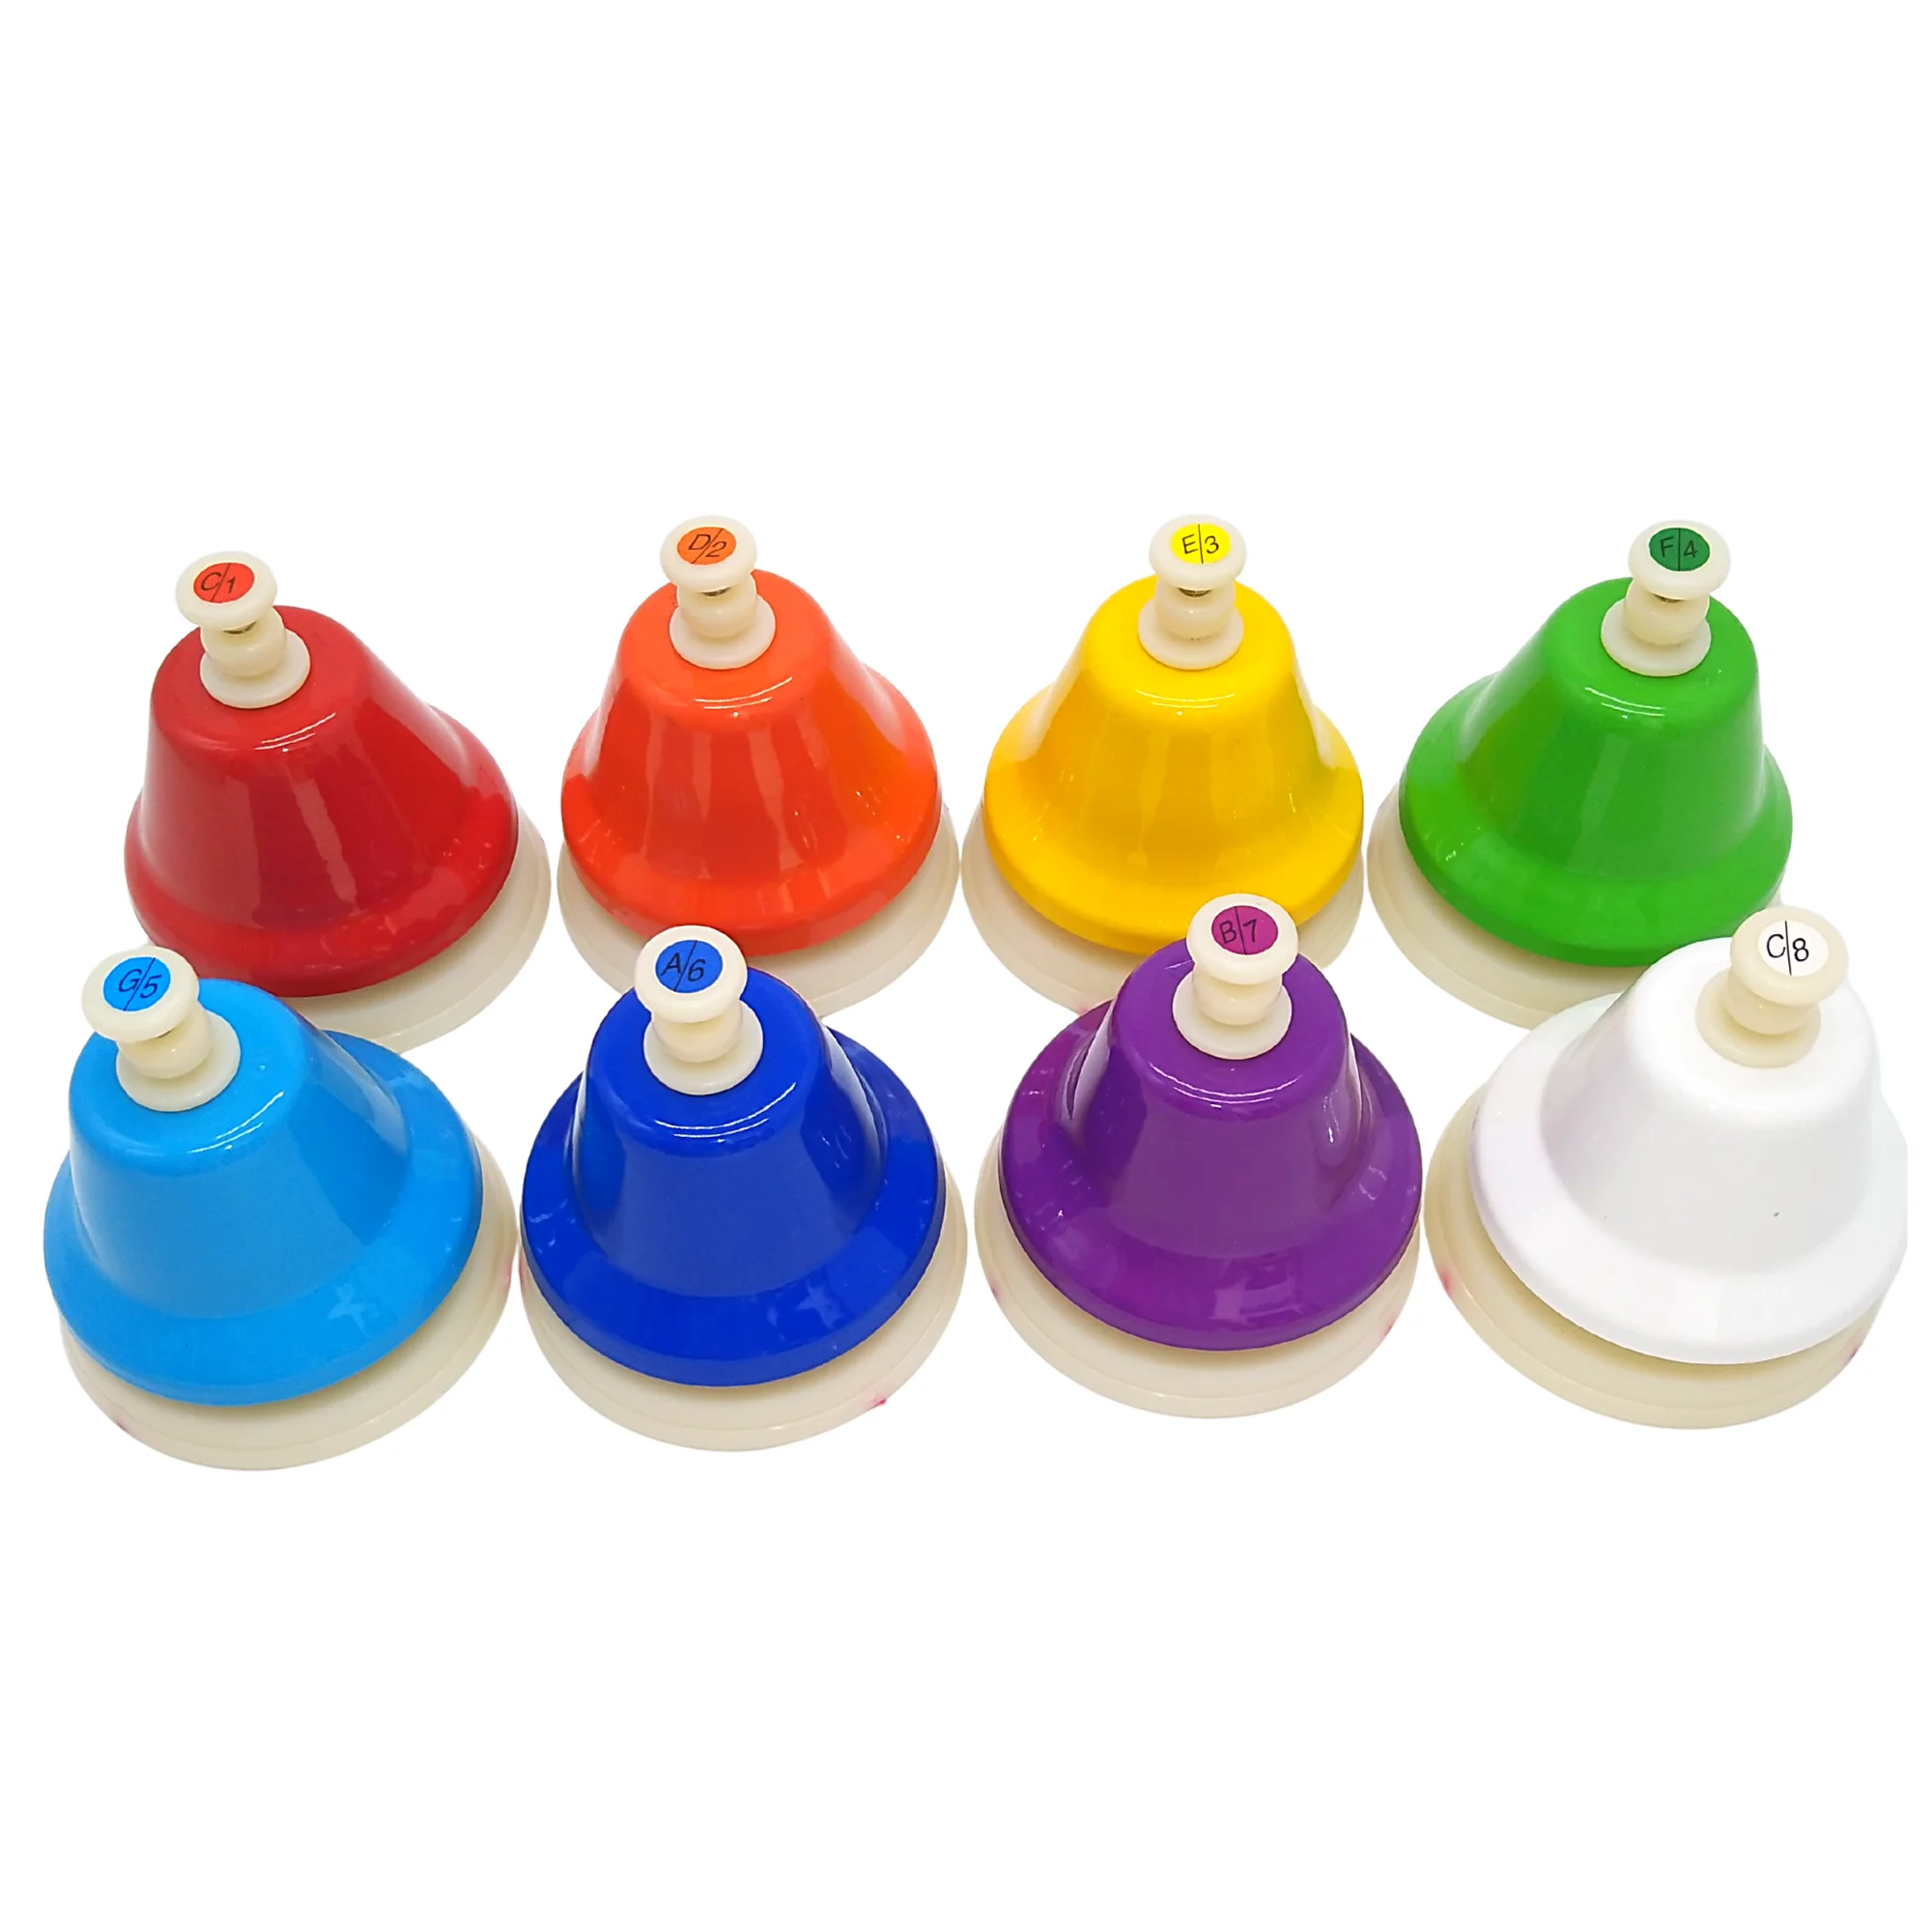 EJY 8 Note Diatonic Metal Hand Bells Set Musical Instrument for Musical Instrument Kids Gift 